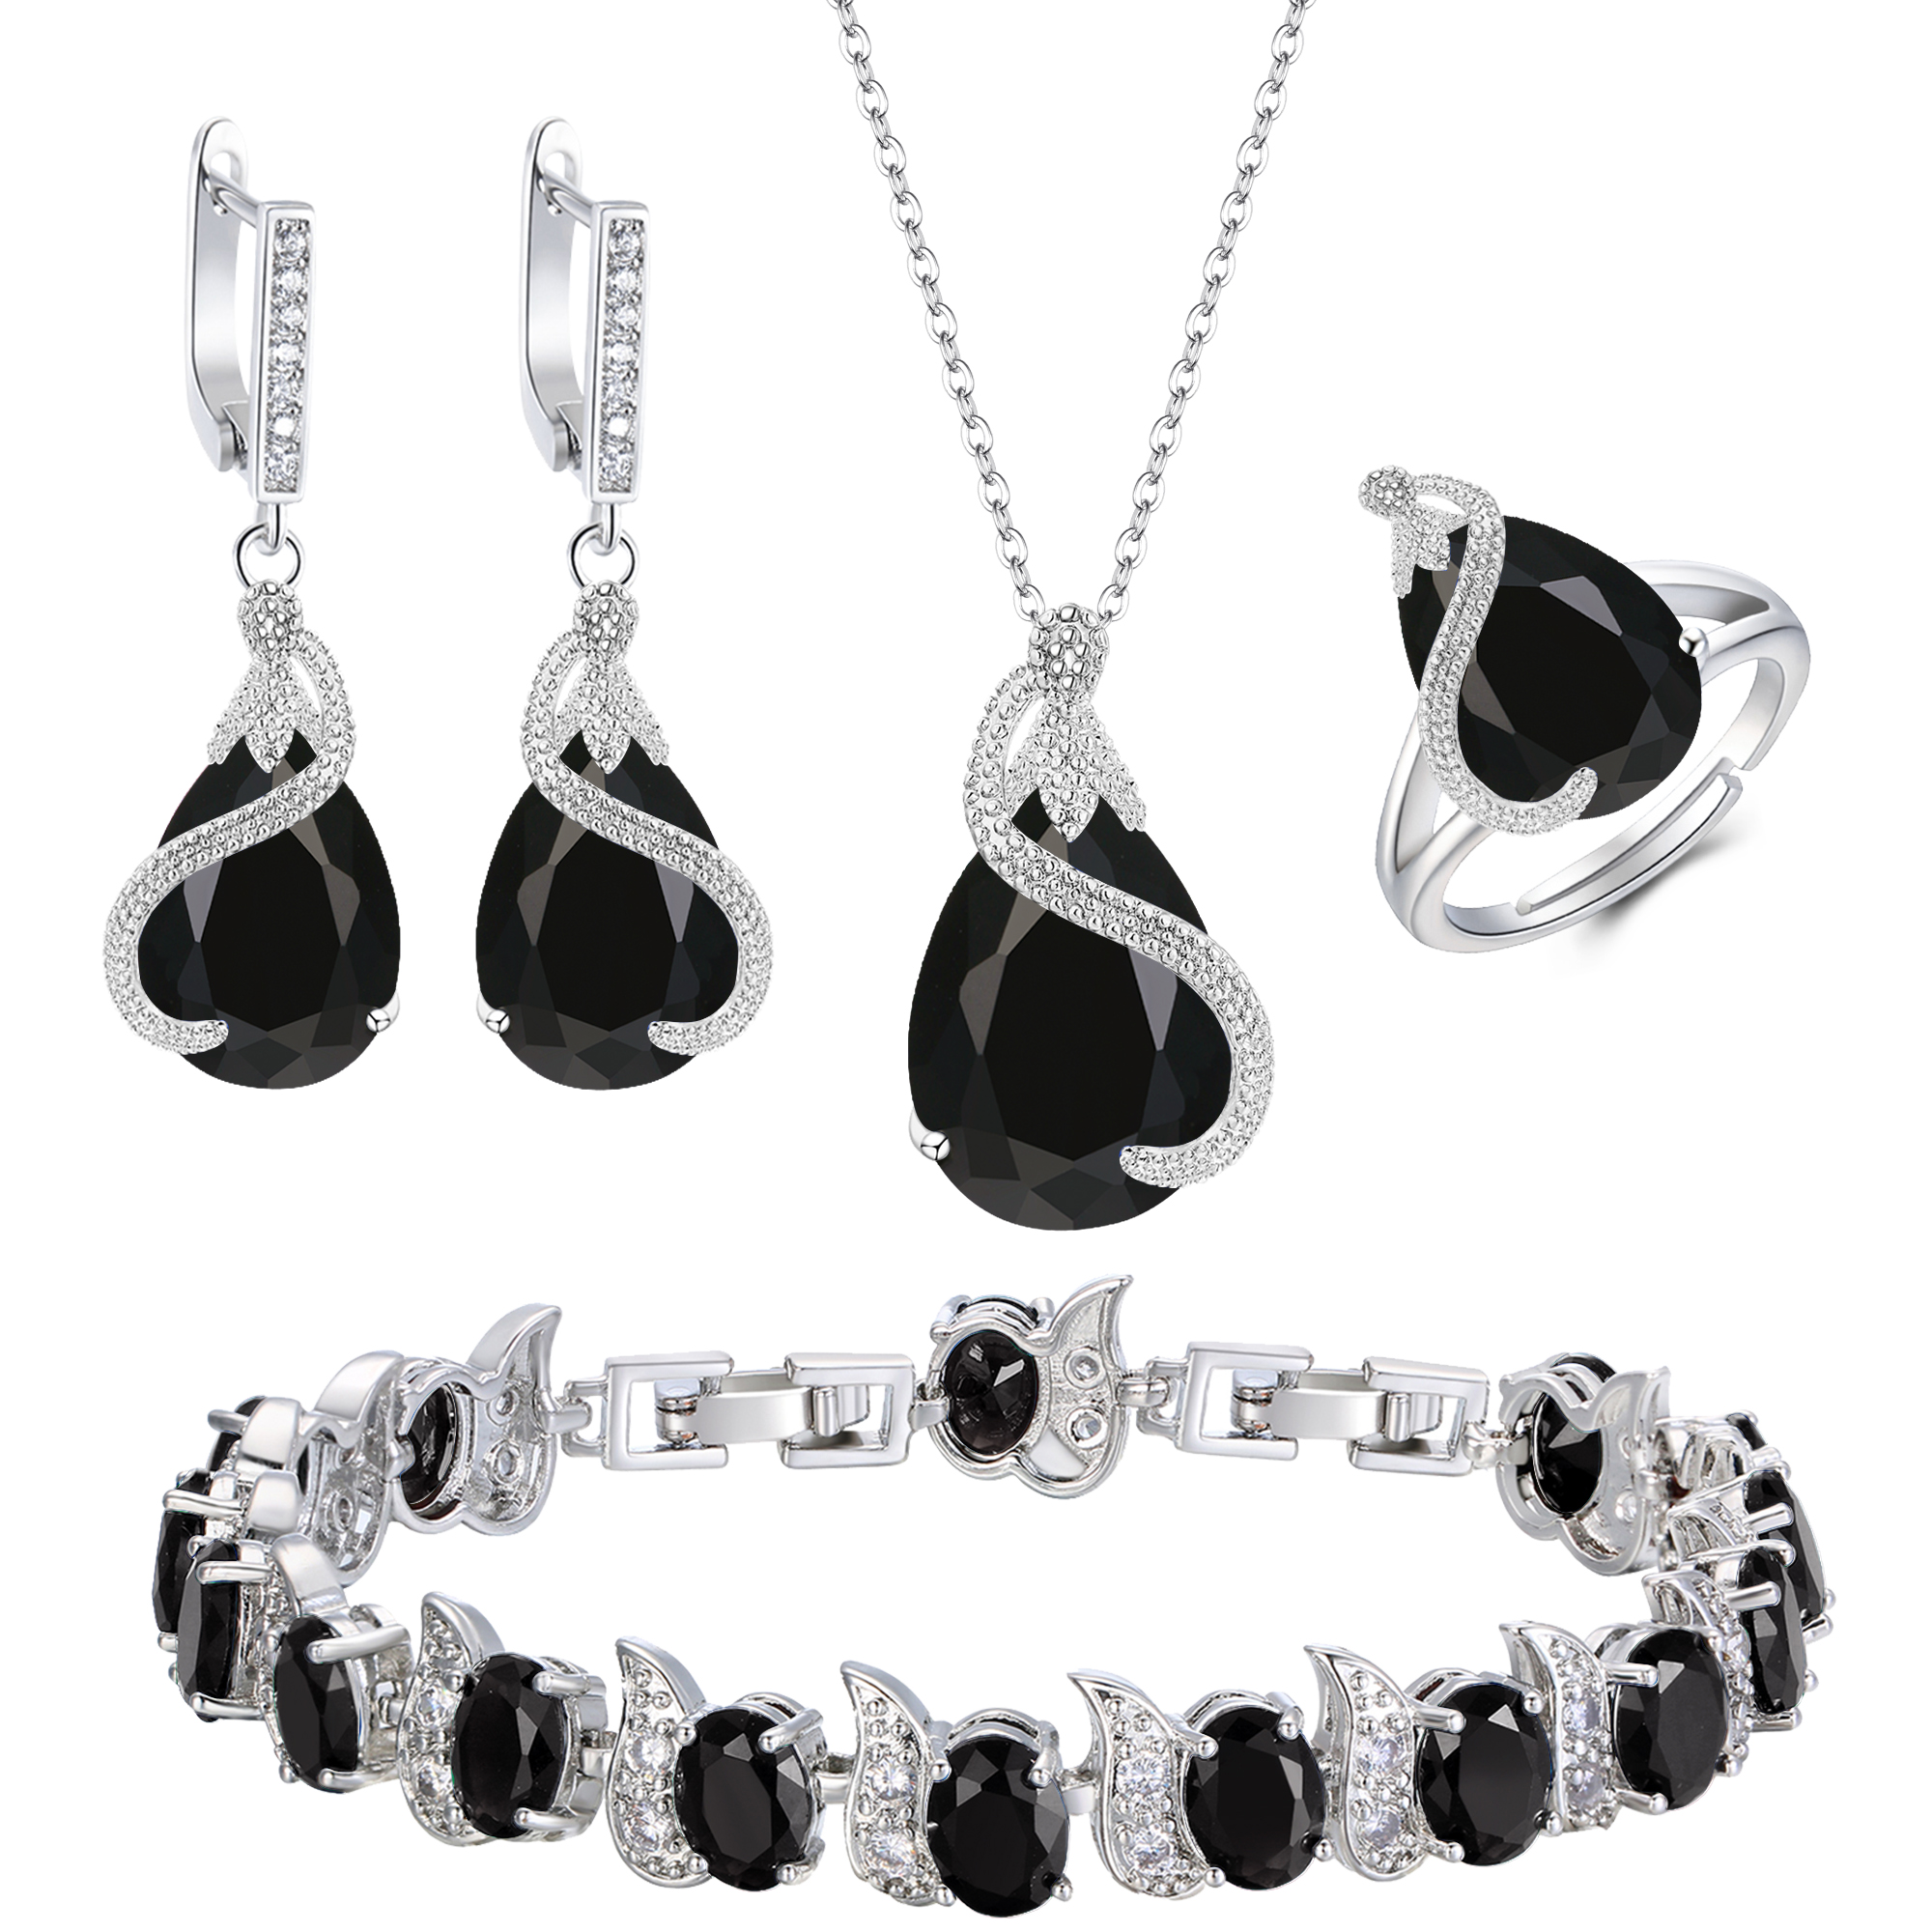 Wedure Wedding CZ Jewelry Sets for Bride, Birthstone CZ Necklace Earrings Bracelet Ring Sets for Birthday/Mother's Day Gifts for Mom/Wife/Sister/Best Friend Black Silver-Tone - image 1 of 5